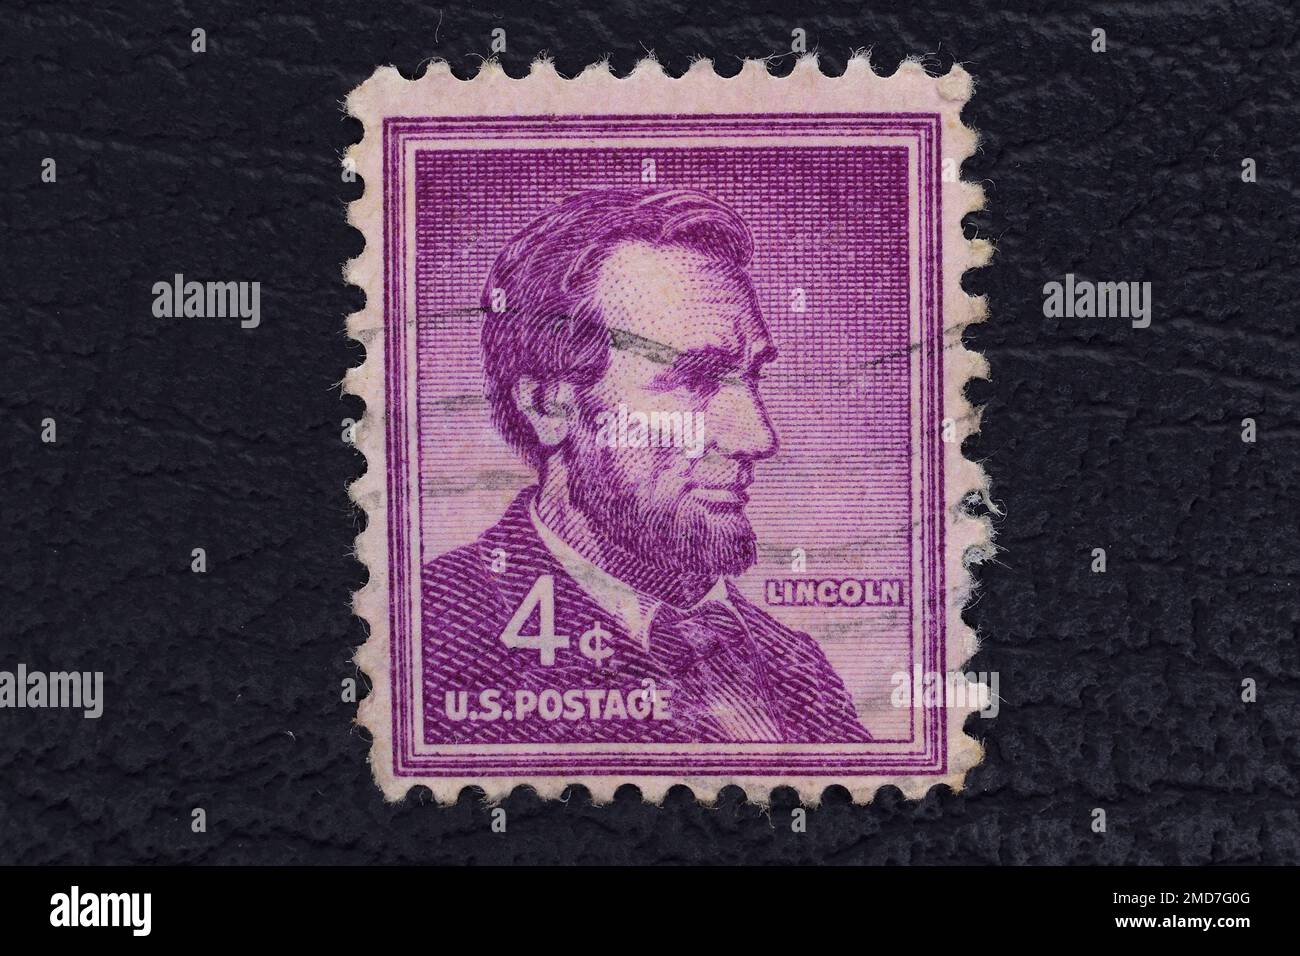 Valverde (CT), Italy - January 15, 2023: a old postage stamp from USA showing a drawing of Abraham Lincoln Stock Photo